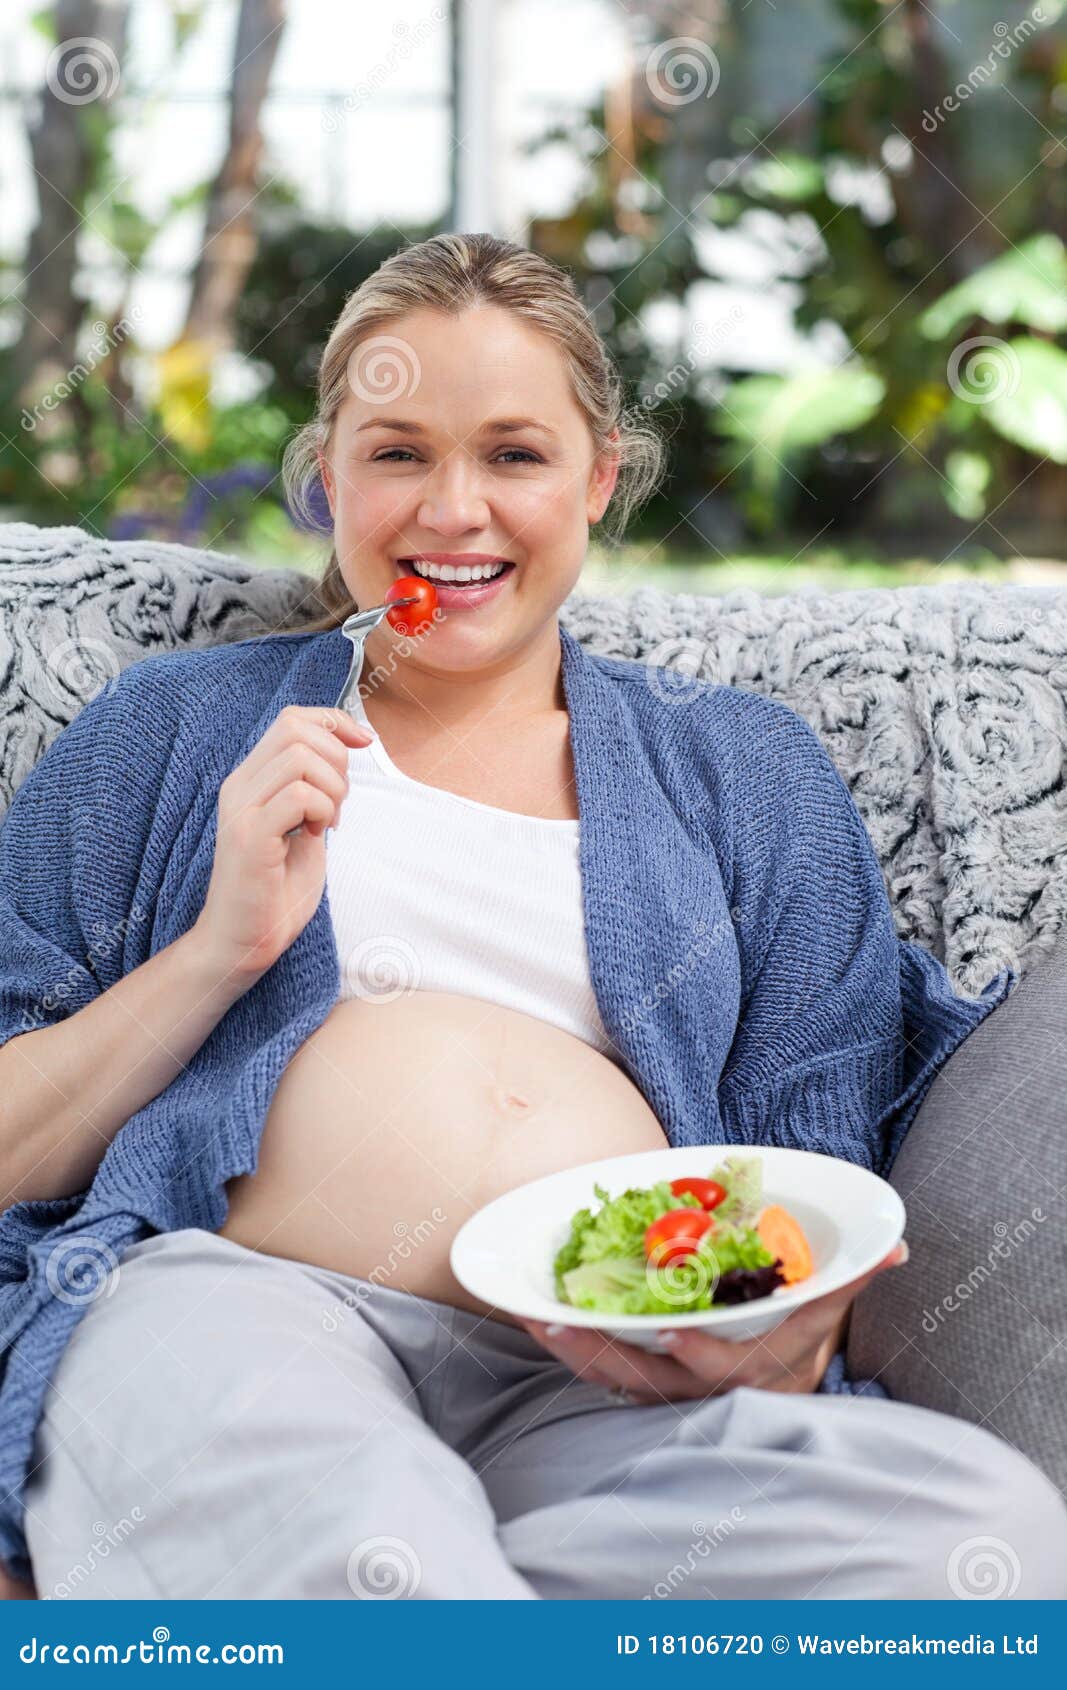 Pregnant Woman Eating Vegetables Stock Photo - Image of ...